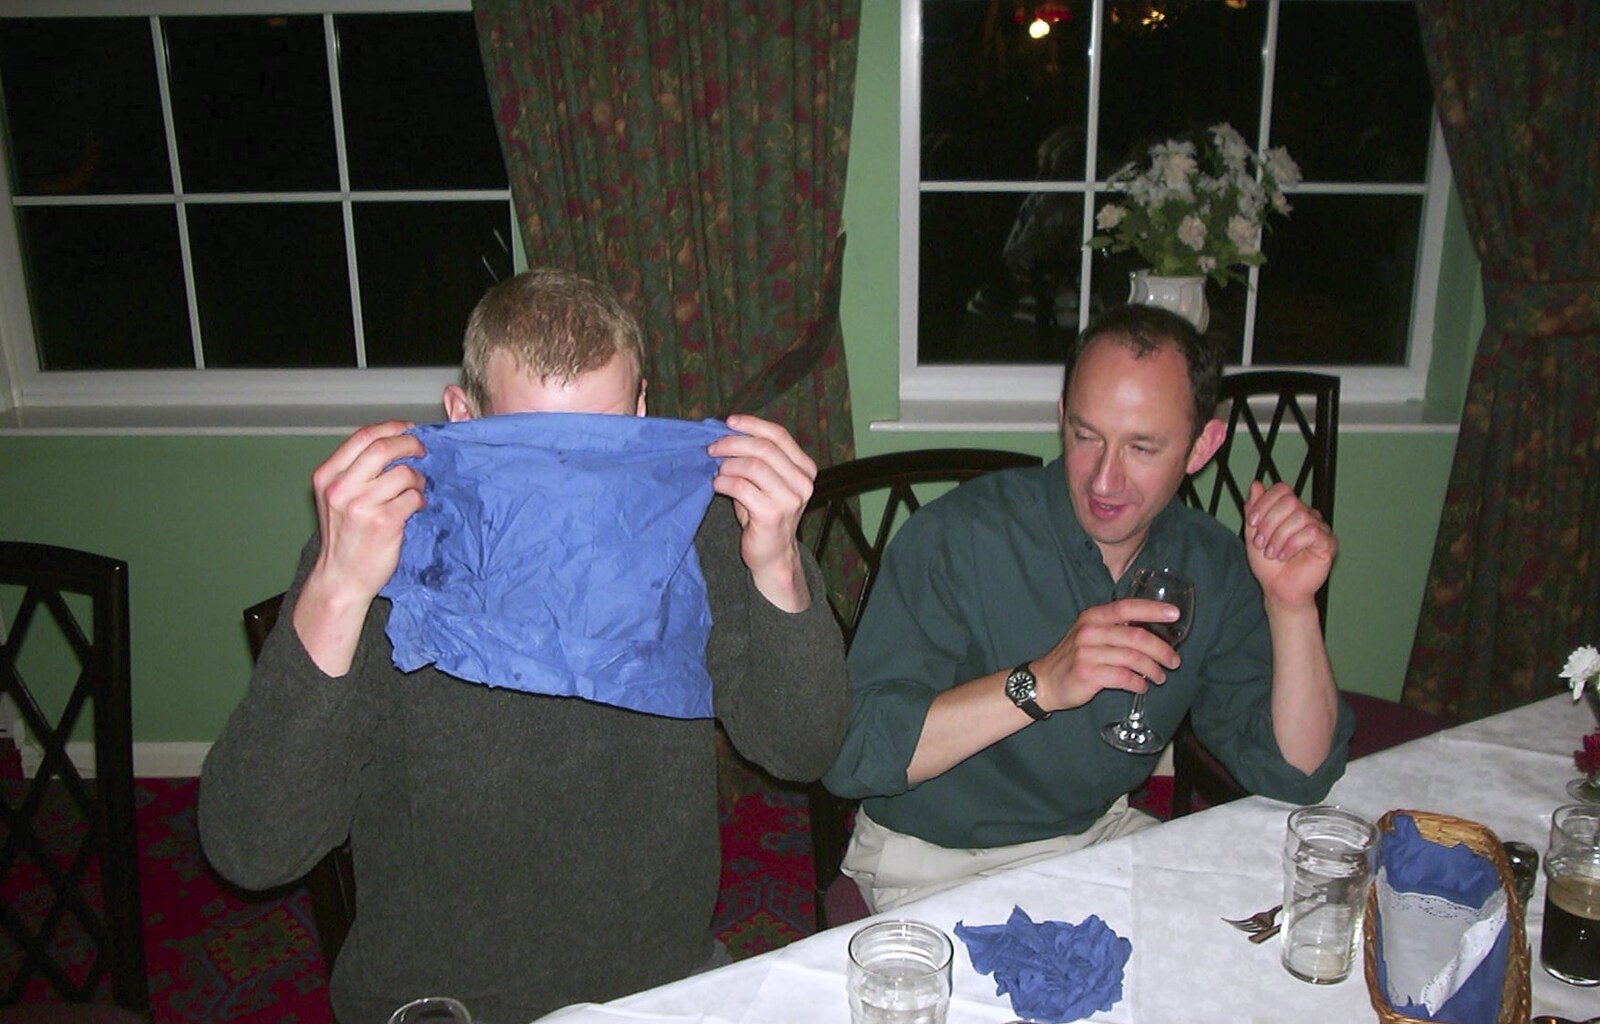 Bill hides his face from The BSCC Bike Ride Weekend, Kelling, Norfolk - 9th May 2003